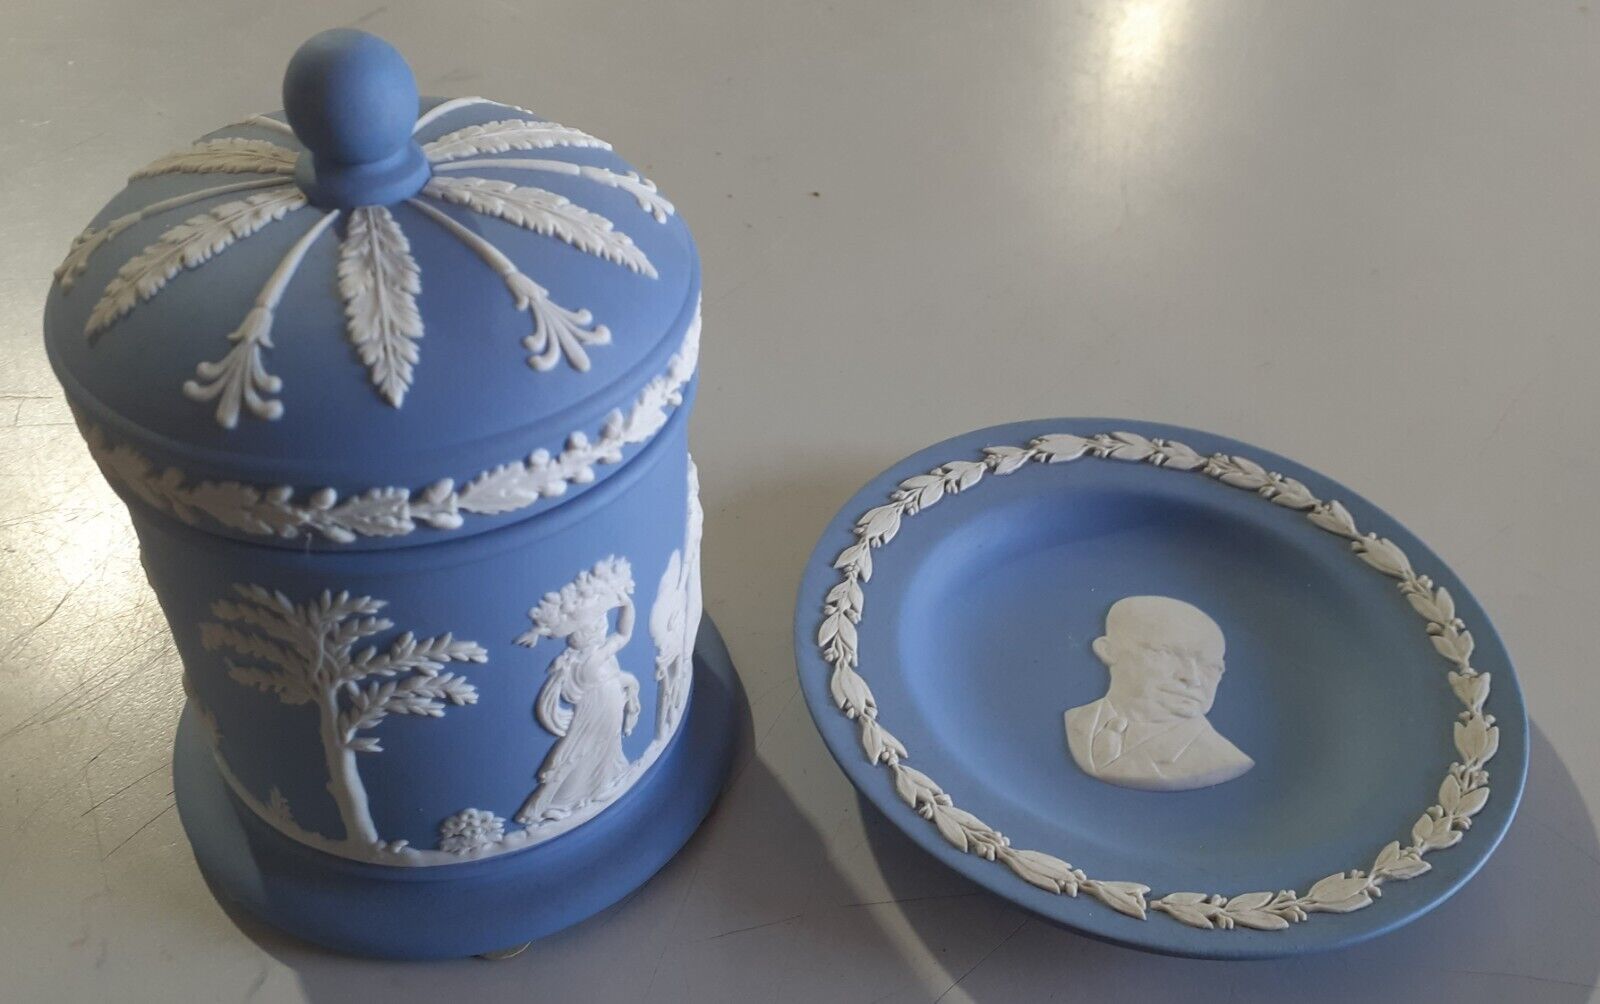 WEDGEWOOD BLUE JASPARWARE ENGLISH POTERY WITH DECORATIVE PLATE